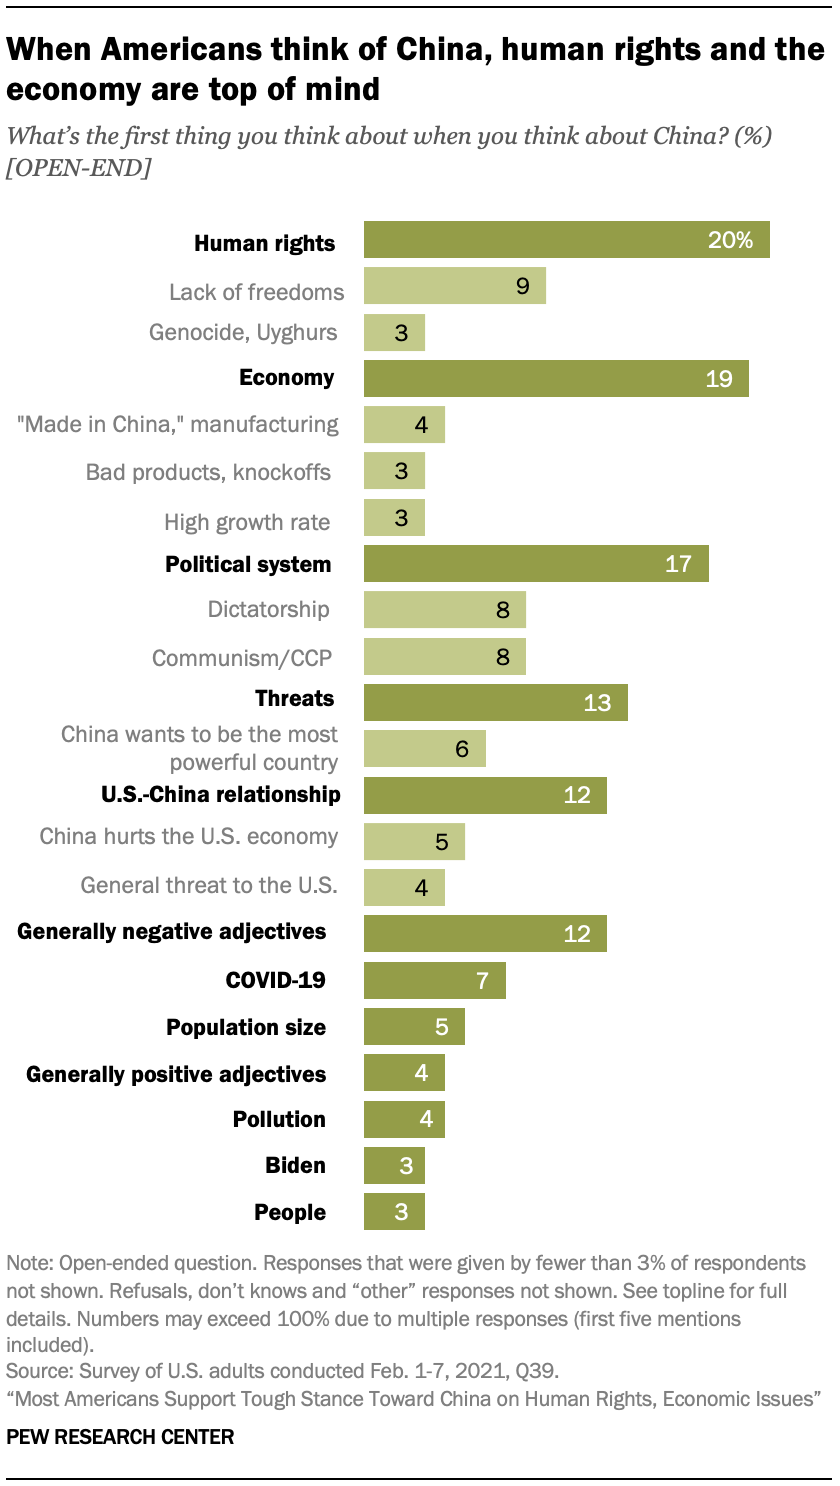 When Americans think of China, human rights and the economy are top of mind